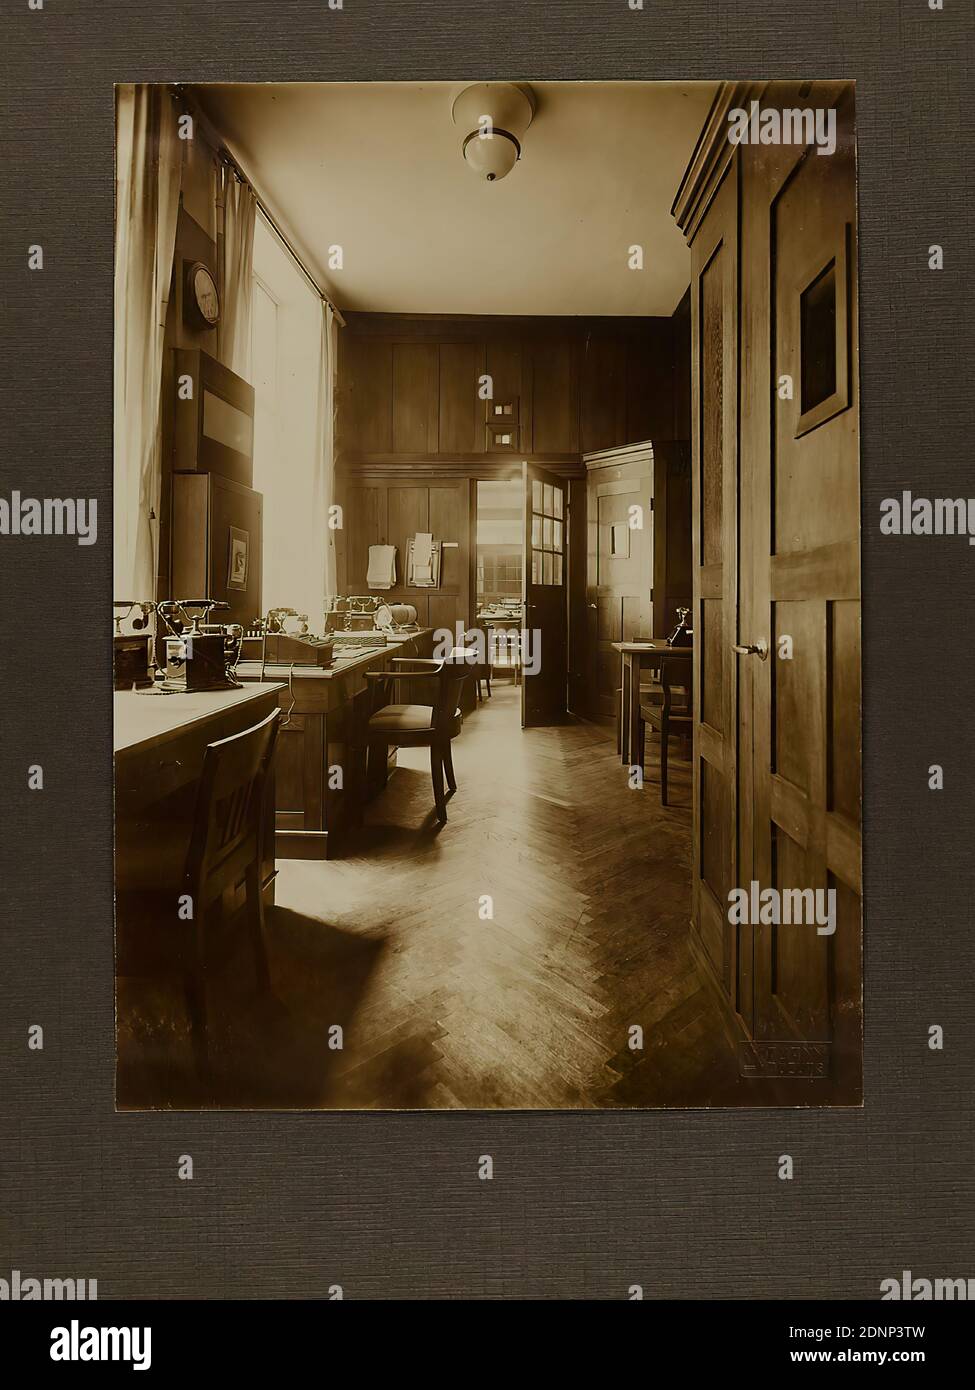 Heinrich Hamann, Atelier J. Hamann, Johann Hinrich W. Hamann, Mitteldeutsche Creditbank, foreign exchange conversion room, silver gelatin paper, black and white positive process, picture size: height: 23.00 cm; width: 16.70 cm, dry stamp, J. HAMANN, Hamburg, titled and dated: verso: handwritten in lead: Hamburg circa 1922, no. 20 Mitteldeutsche Creditbank, Devisen-Umrechnungsraum, J. Hamann, Hamburg 1, Neustädterstr, 66/68, Atelier für Photographie aller Art, Awarded Hamburg 1899, Copyright by; All film and reproduction rights reserved; reporting photography, office (administration finance), t Stock Photo